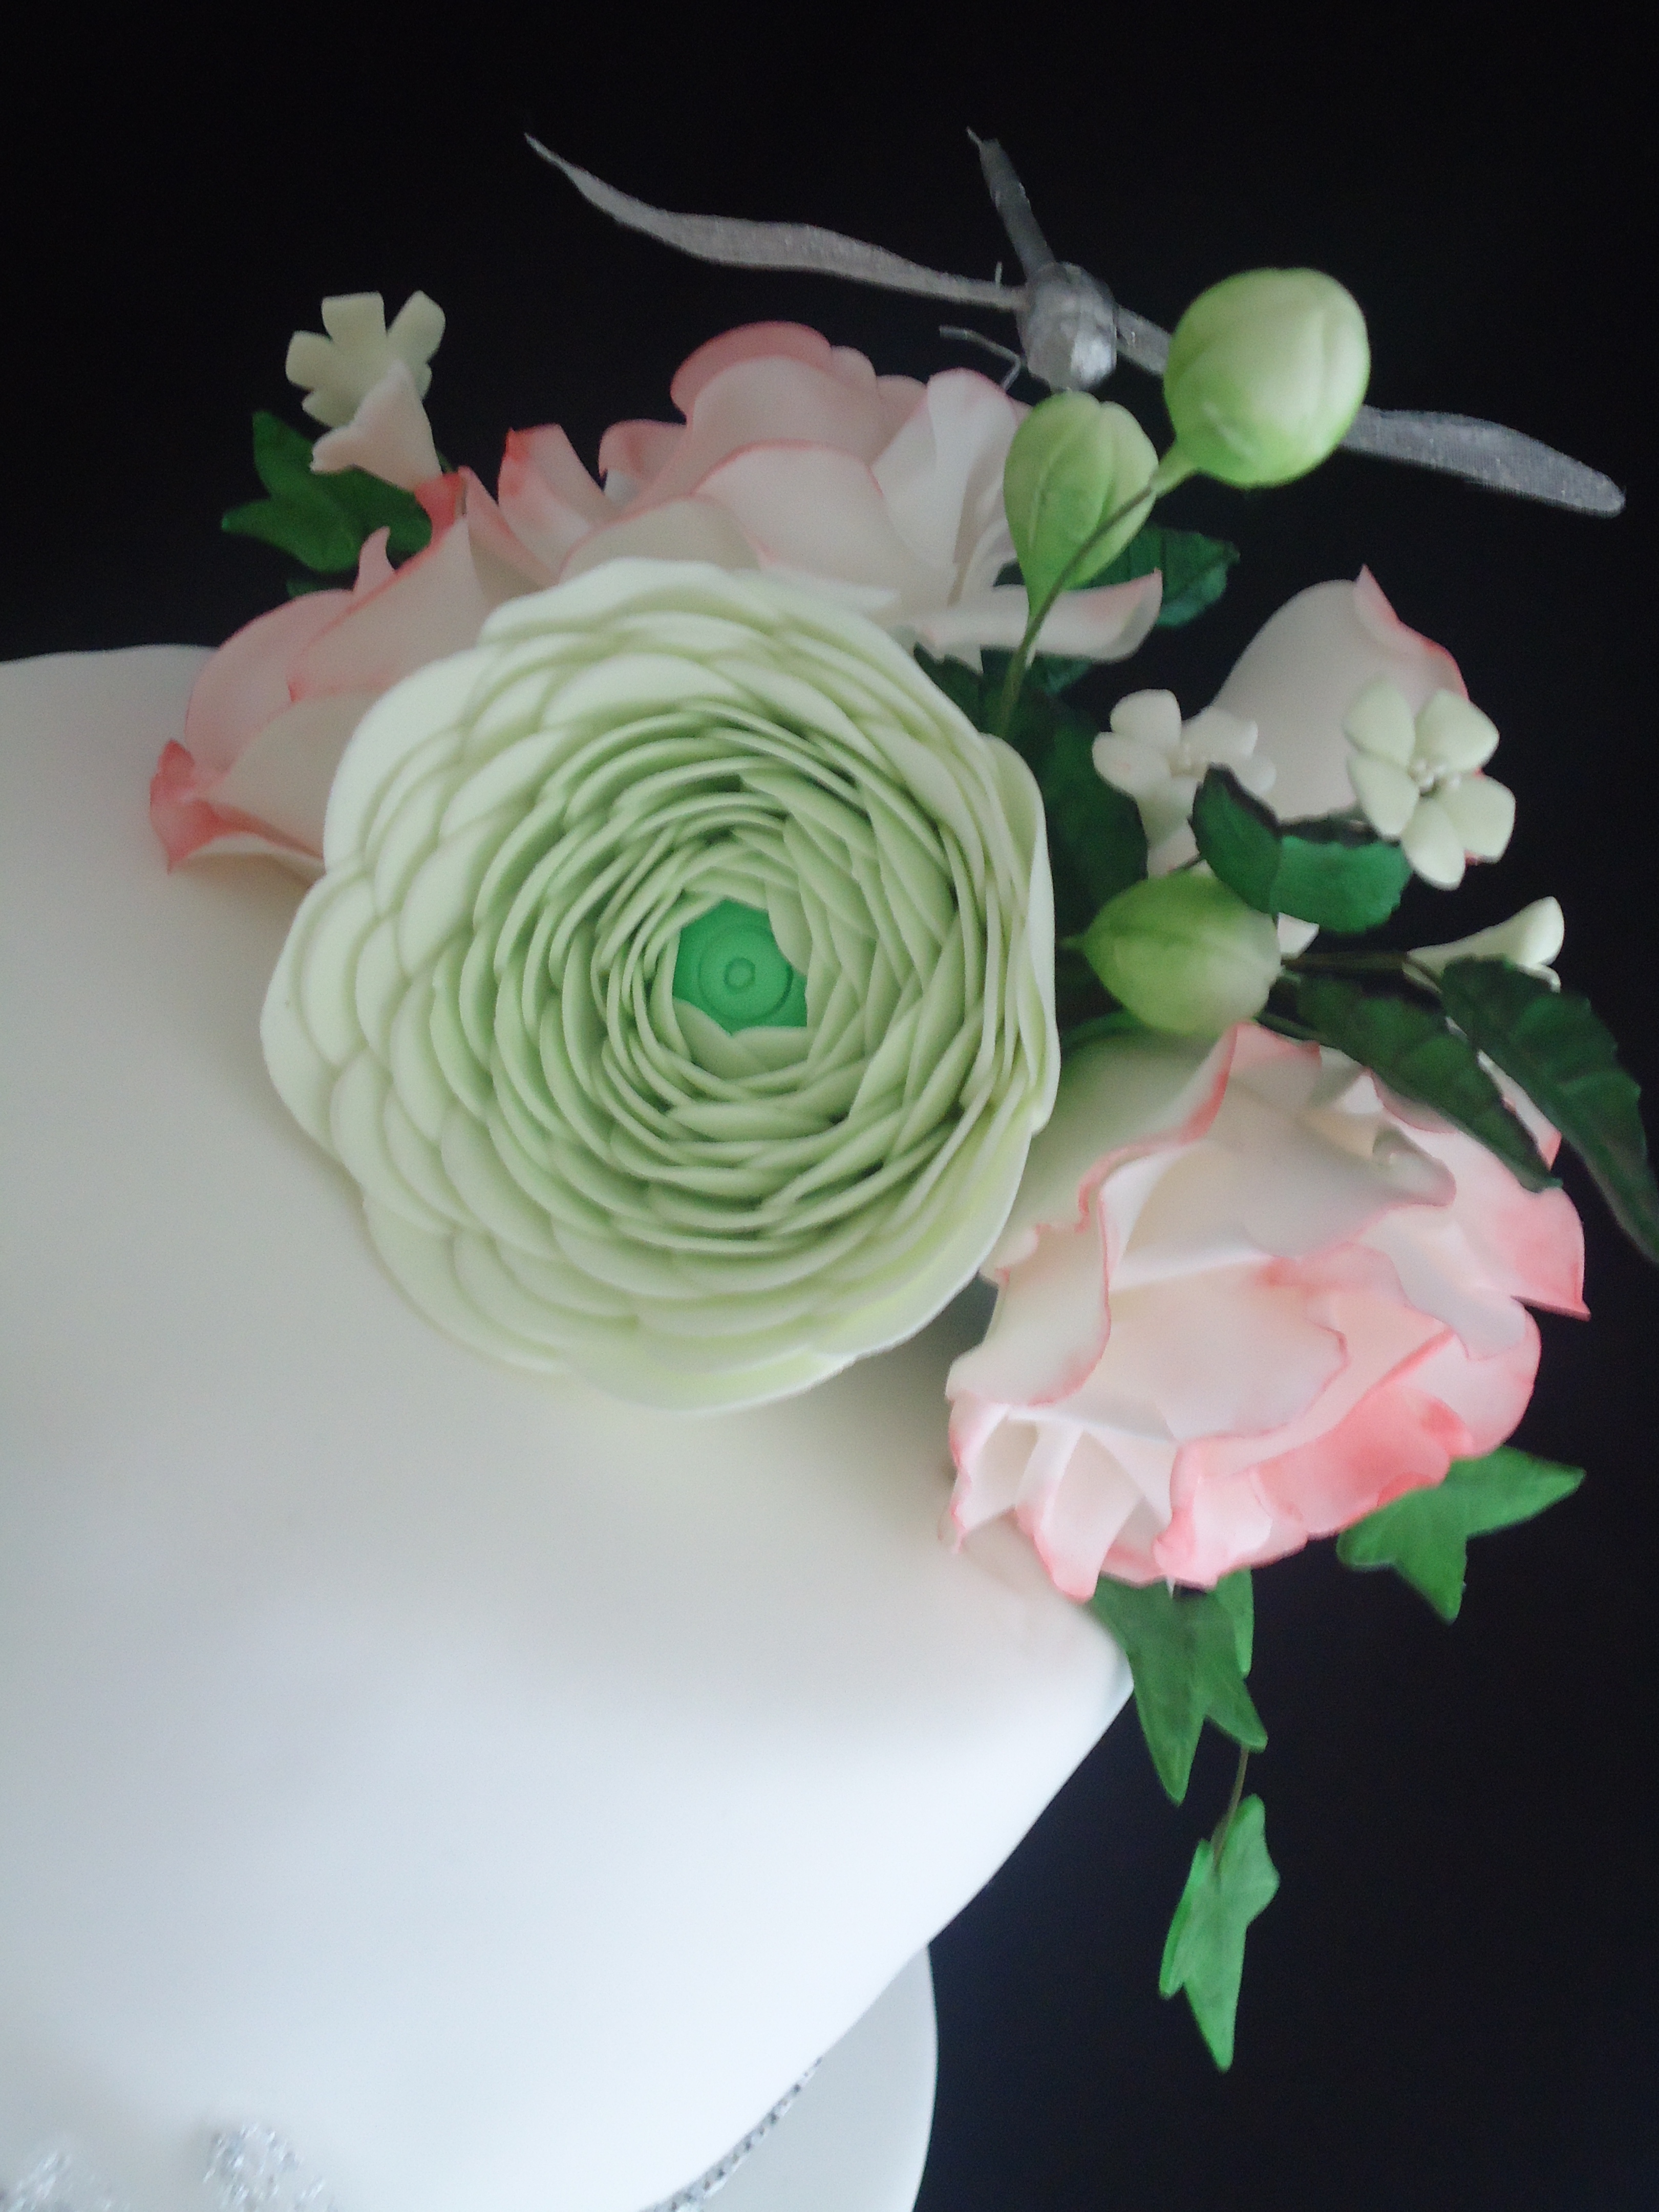 Close up of the flowers - Ranunculus and roses.